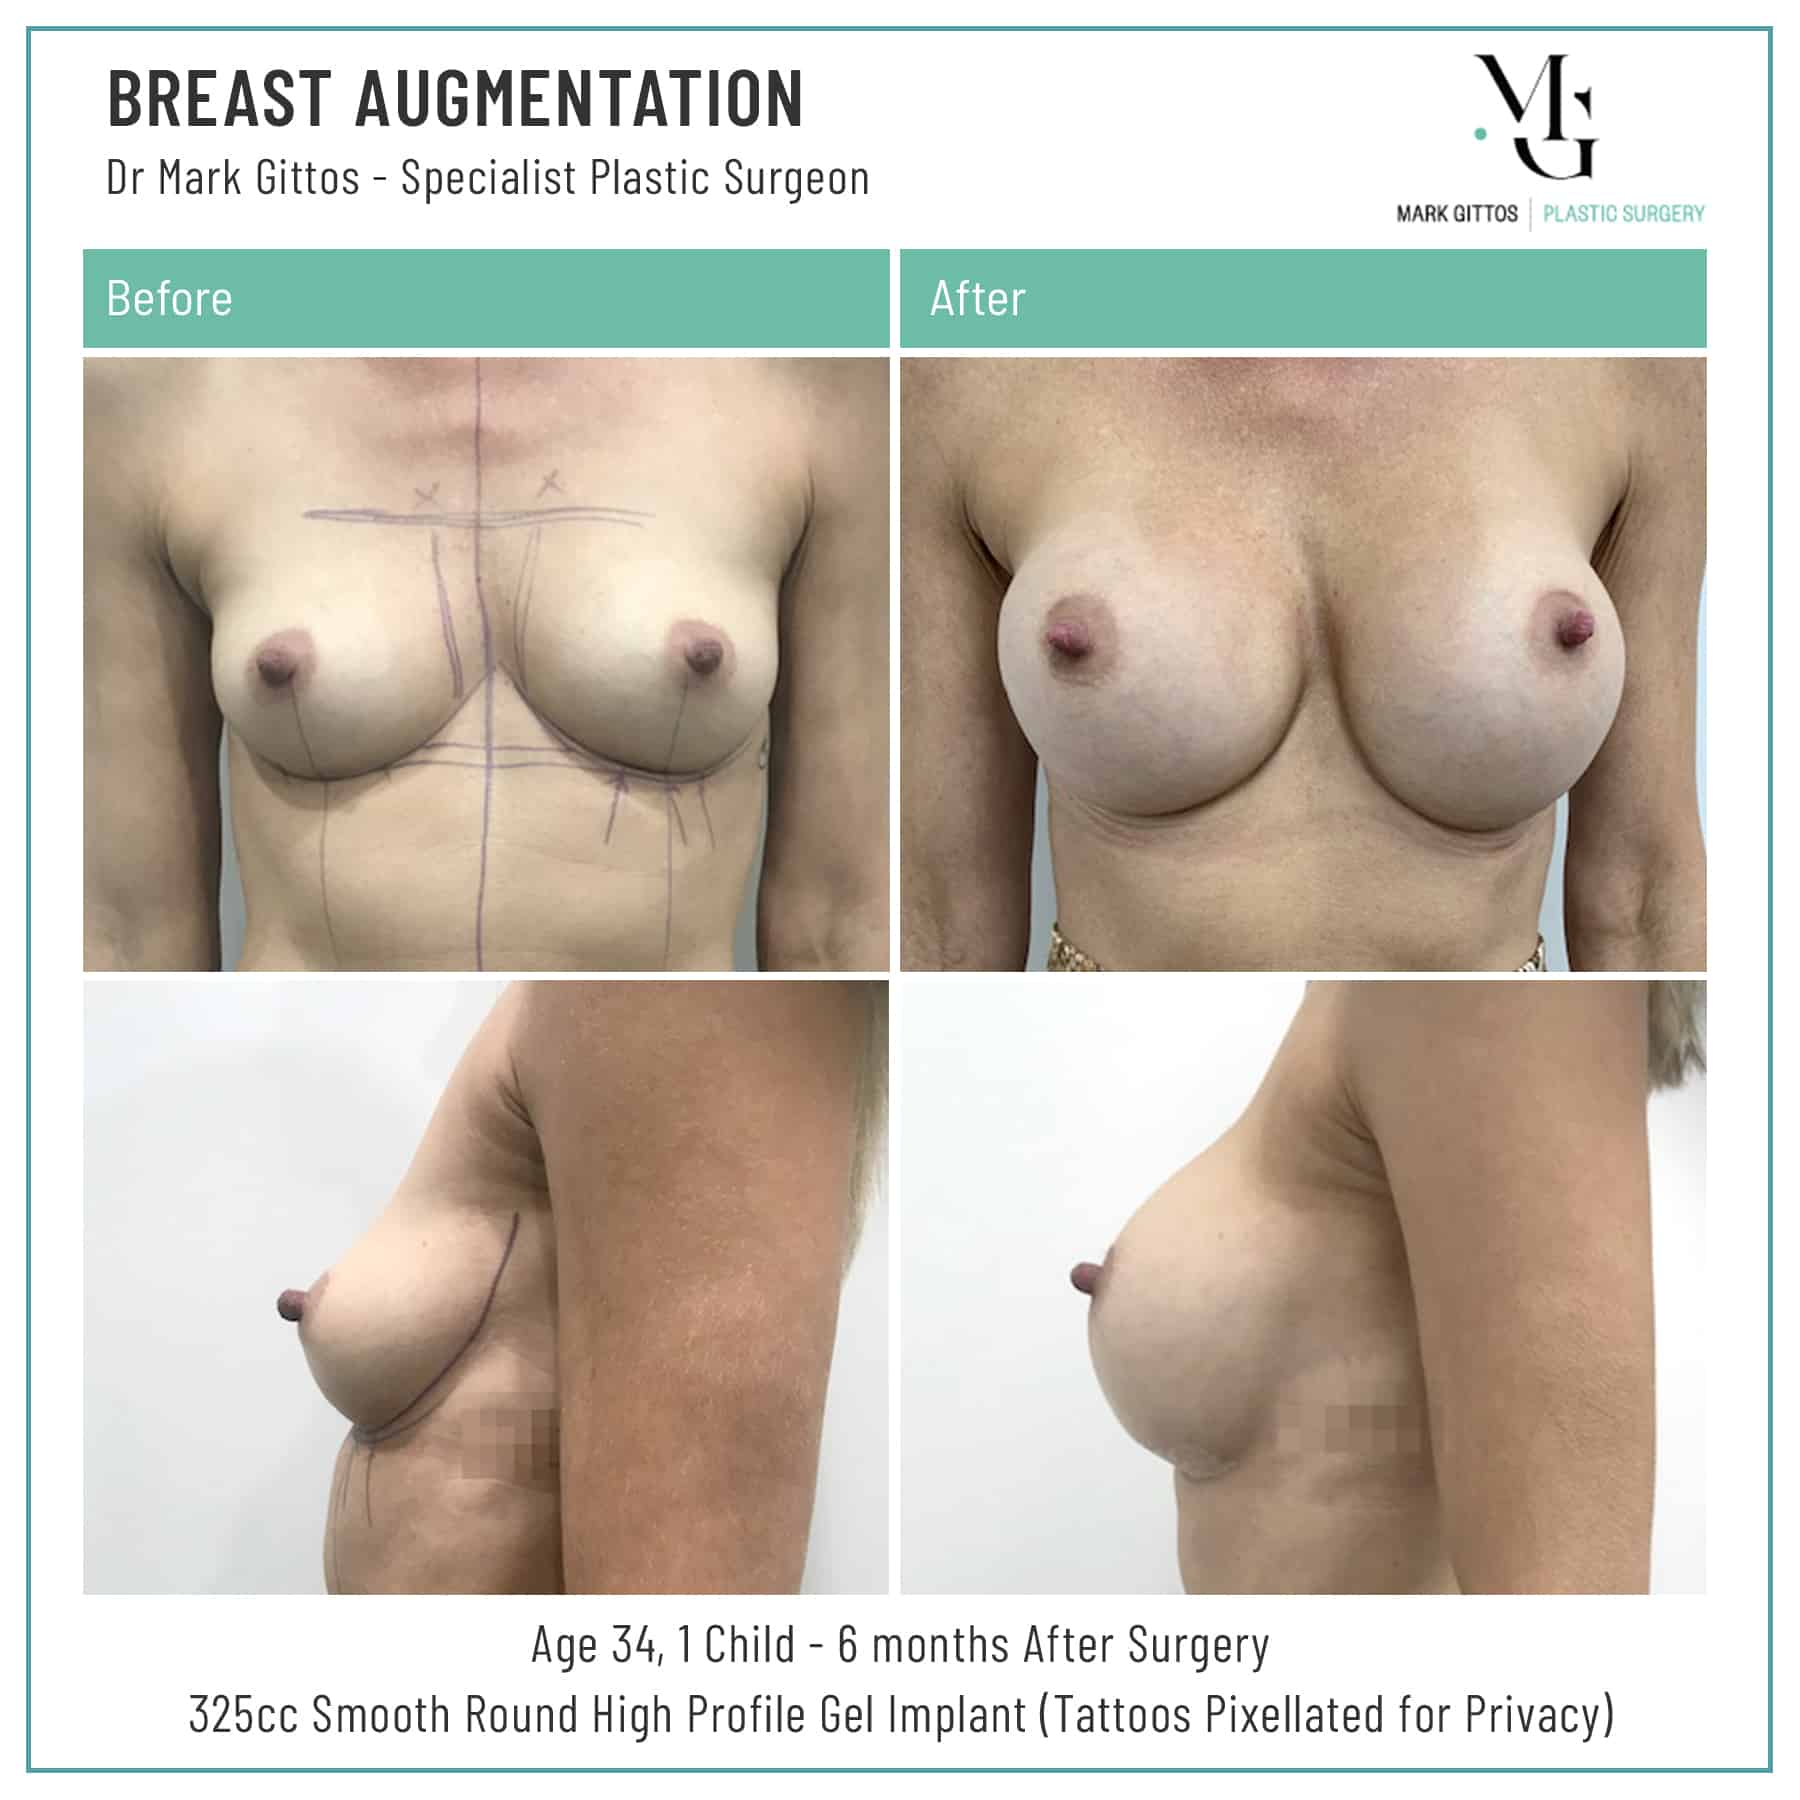 Breast-Augmentation-Before-and-After-5-Dr-Gittos-Blur